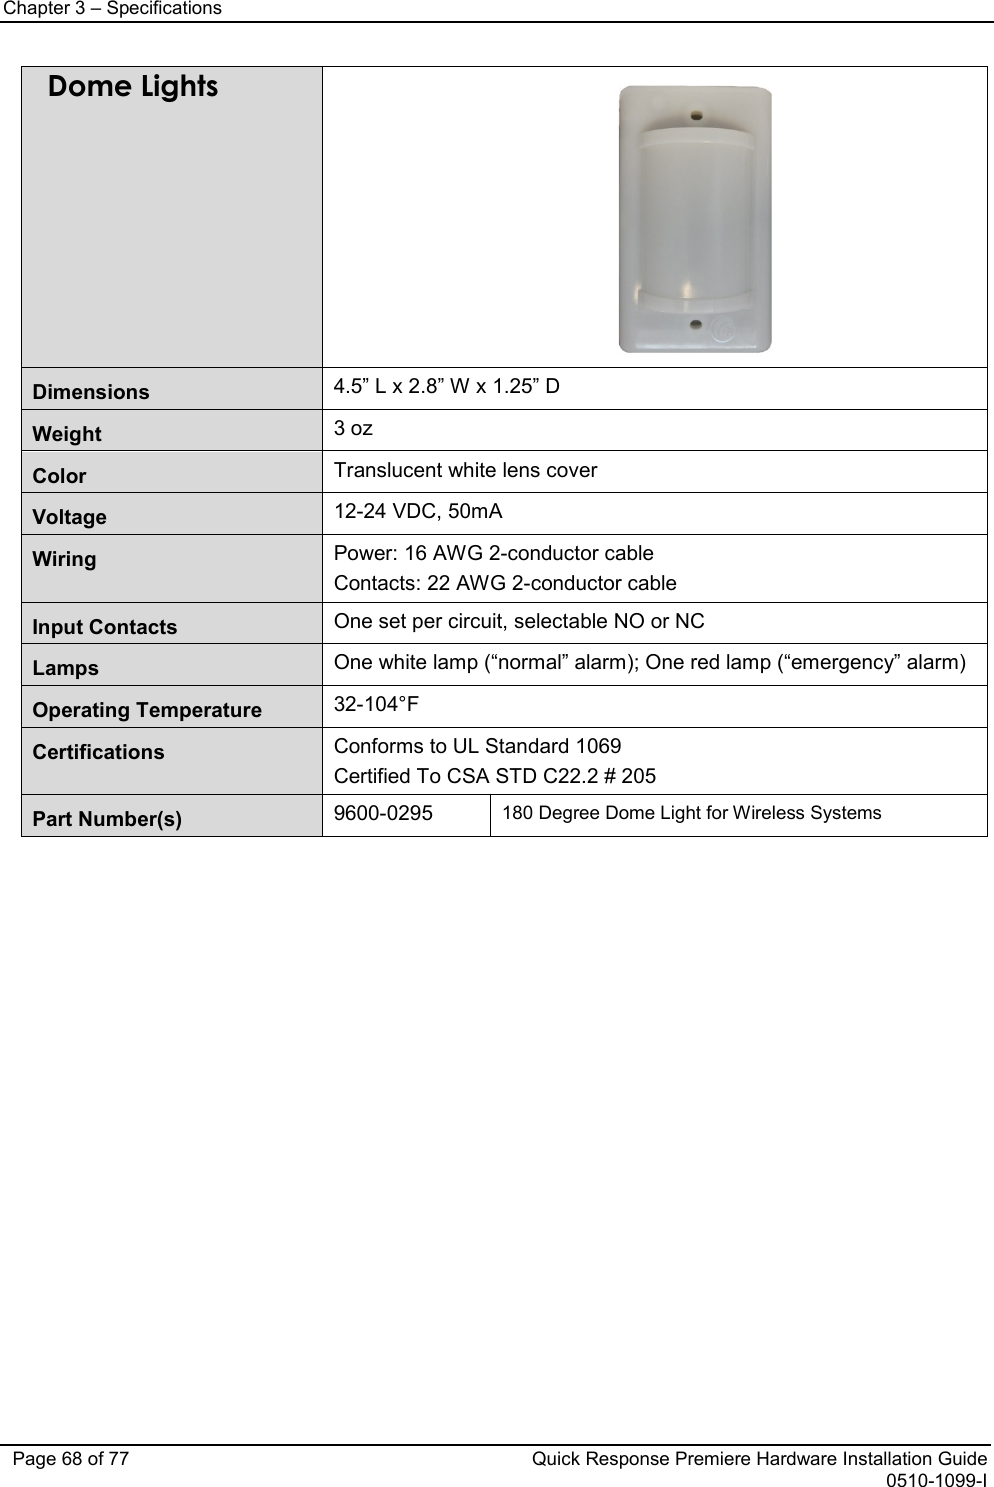 Chapter 3 – Specifications   Page 68 of 77 Quick Response Premiere Hardware Installation Guide 0510-1099-I Dome Lights                 Dimensions 4.5” L x 2.8” W x 1.25” D Weight 3 oz Color Translucent white lens cover Voltage 12-24 VDC, 50mA Wiring  Power: 16 AWG 2-conductor cable Contacts: 22 AWG 2-conductor cable Input Contacts One set per circuit, selectable NO or NC Lamps One white lamp (“normal” alarm); One red lamp (“emergency” alarm) Operating Temperature 32-104°F Certifications Conforms to UL Standard 1069 Certified To CSA STD C22.2 # 205 Part Number(s)  9600-0295 180 Degree Dome Light for Wireless Systems                          